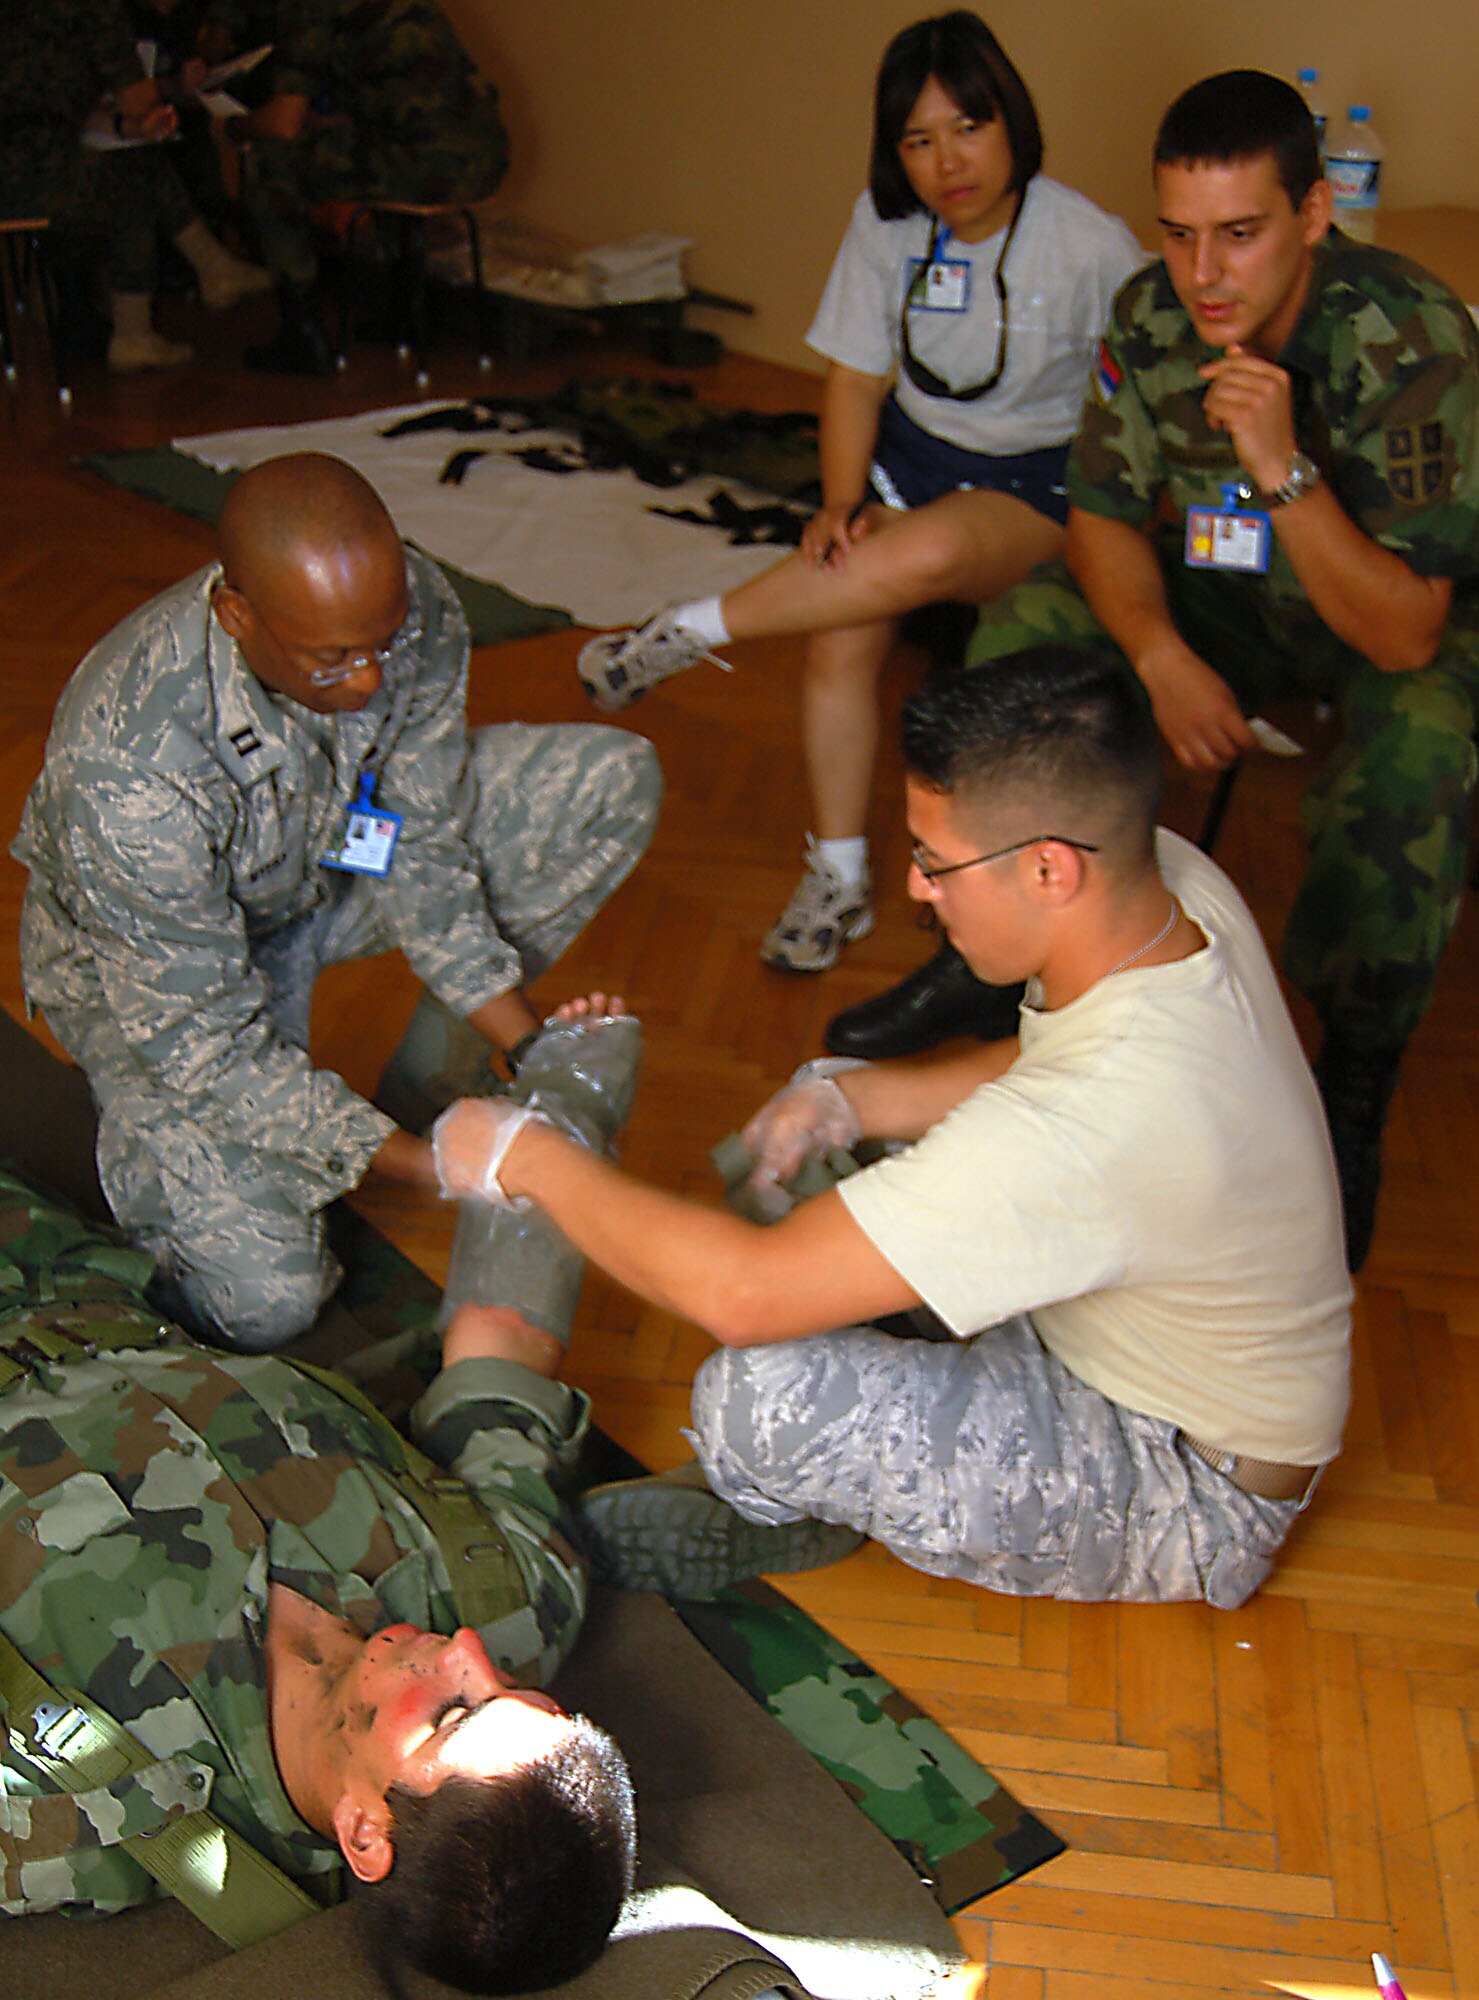 NIS, Serbia – Capt. Radcliffe Myers, 86th Medical Operations Squadron clinical nurse at Ramstein Air Base, Germany; and Staff Sgt. Brayan Jimenez, 86th Aerospace Medicine Squadron medic, also from Ramstein AB; practice applying dressing and bandages to a simulated burn victim played by Stefan Krstic, Serbian Armed Forces soldier, while Capt. Roslyn Thomas, Landstuhl Regional Medical Center nurse in Landstuhl, Germany, and Senior Sgt. Nenad Stevanovic, SAF medical support commander, discuss the process during a military medical training exercise in Central and Eastern Europe, or MEDCEUR 2009, trauma nursing training course taught by members of SAF medics Sept. 4. (U.S. Air Force photo/Senior Airman Kali L. Gradishar)